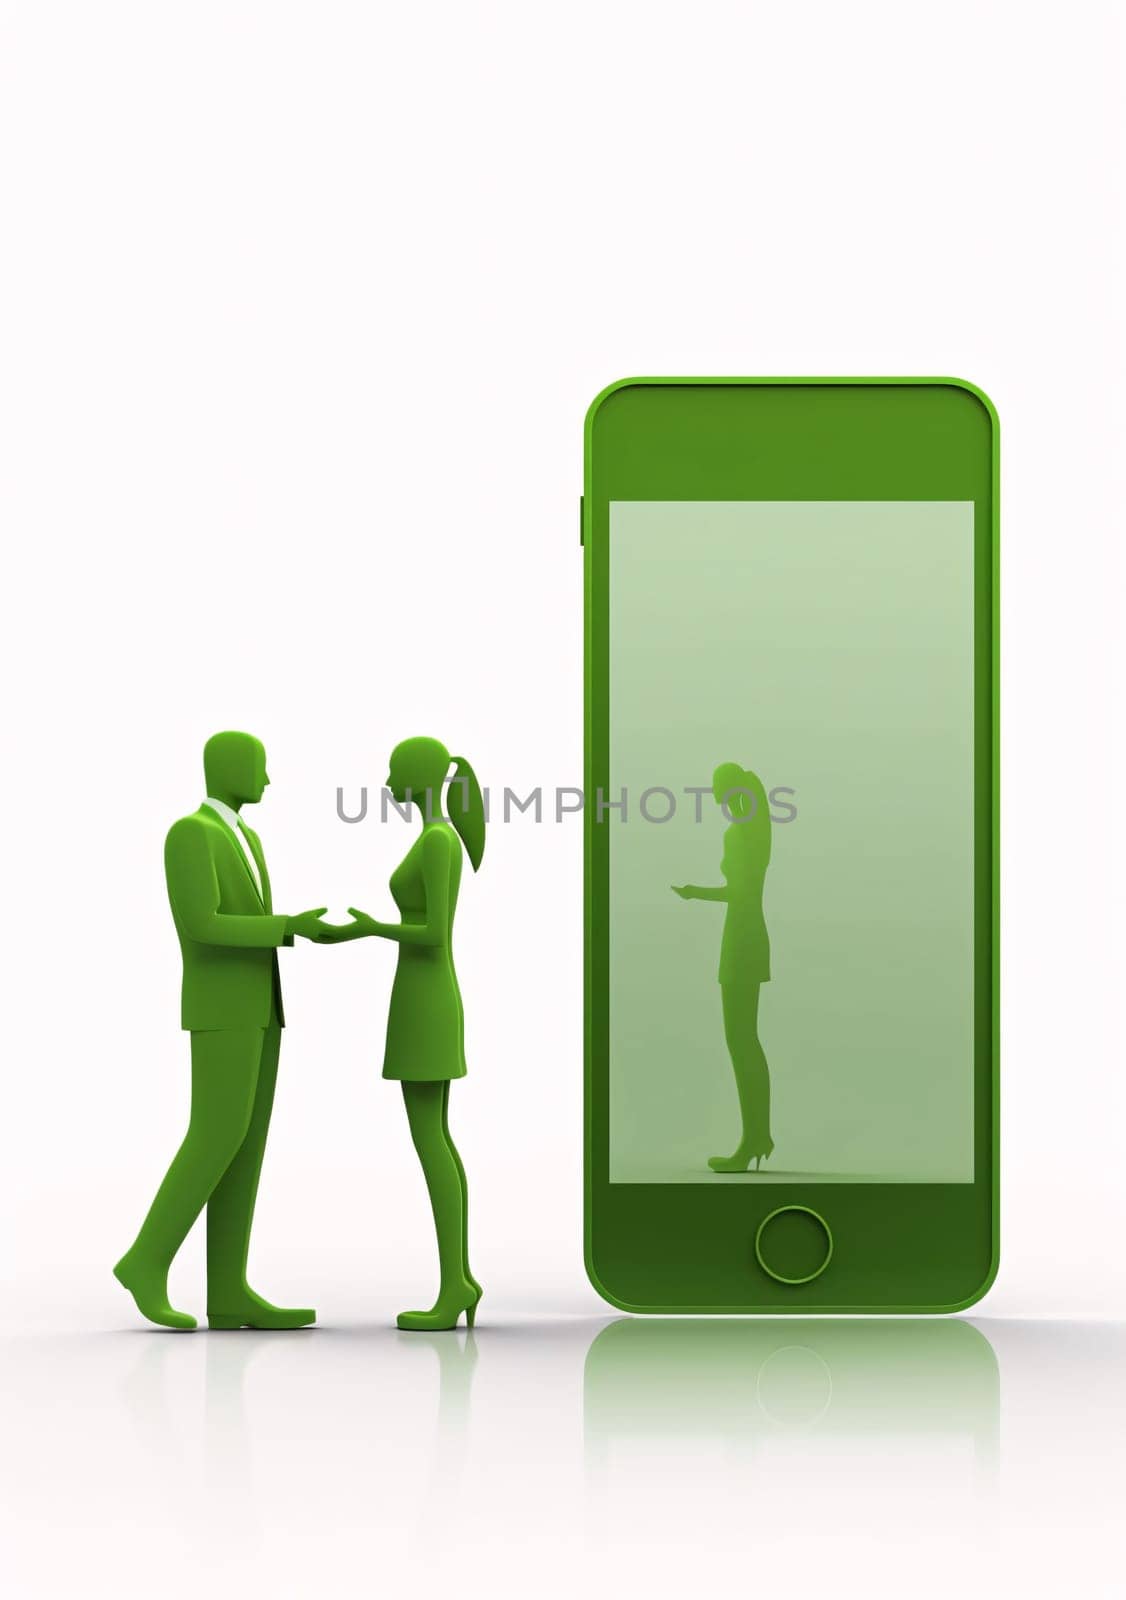 Businessman and businesswoman shaking hands with a smartphone. Business concept by ThemesS